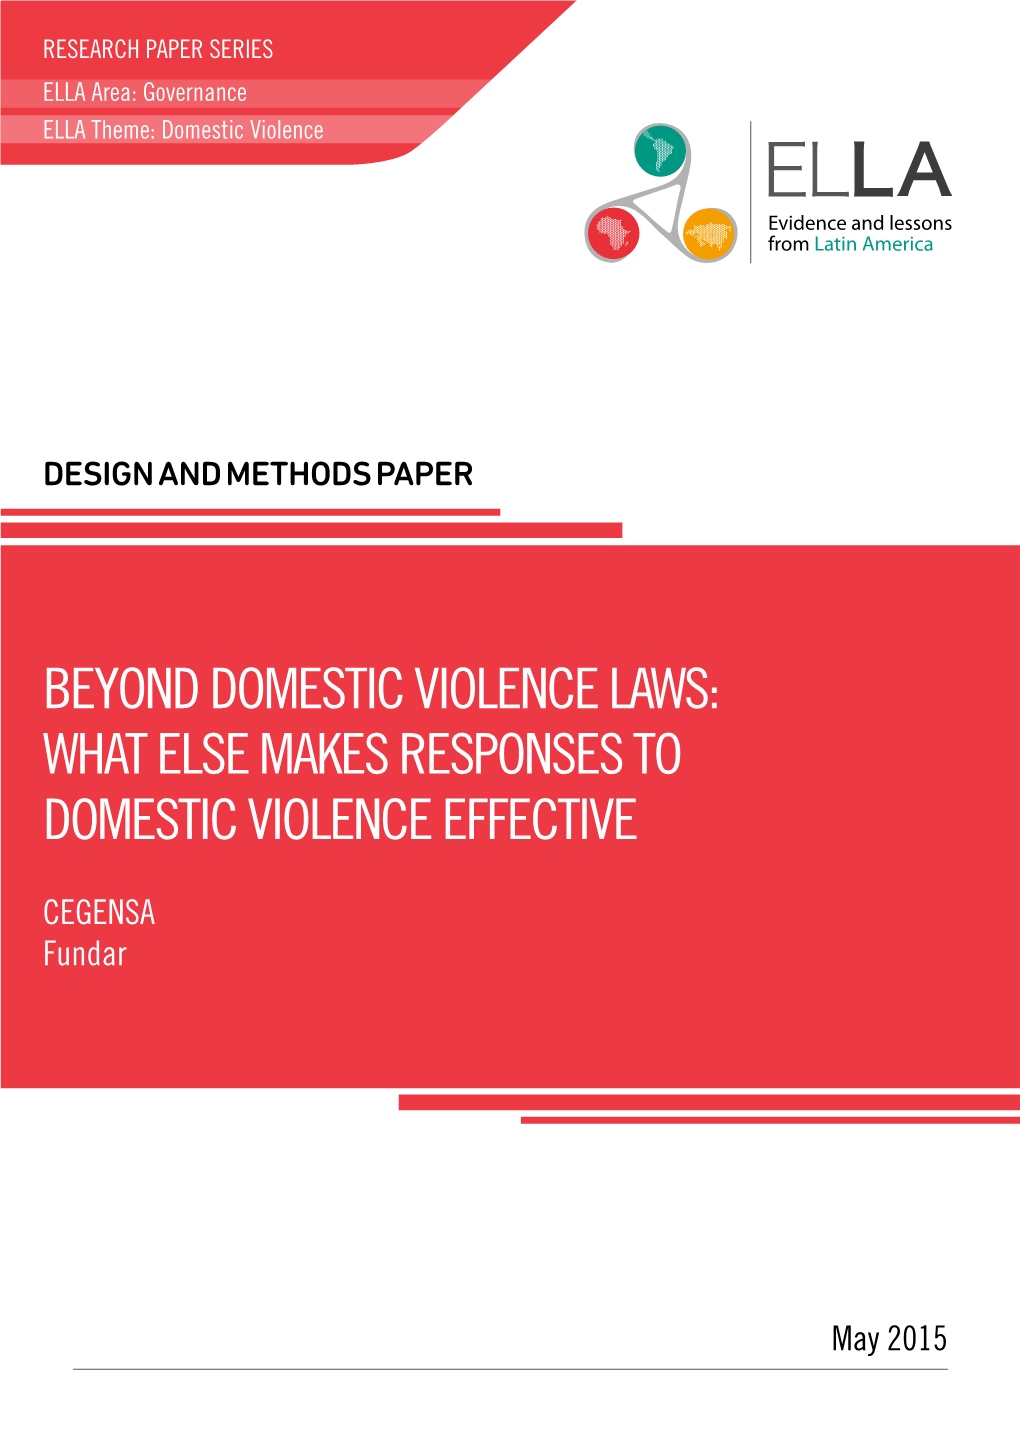 What Else Makes Responses to Domestic Violence Effective